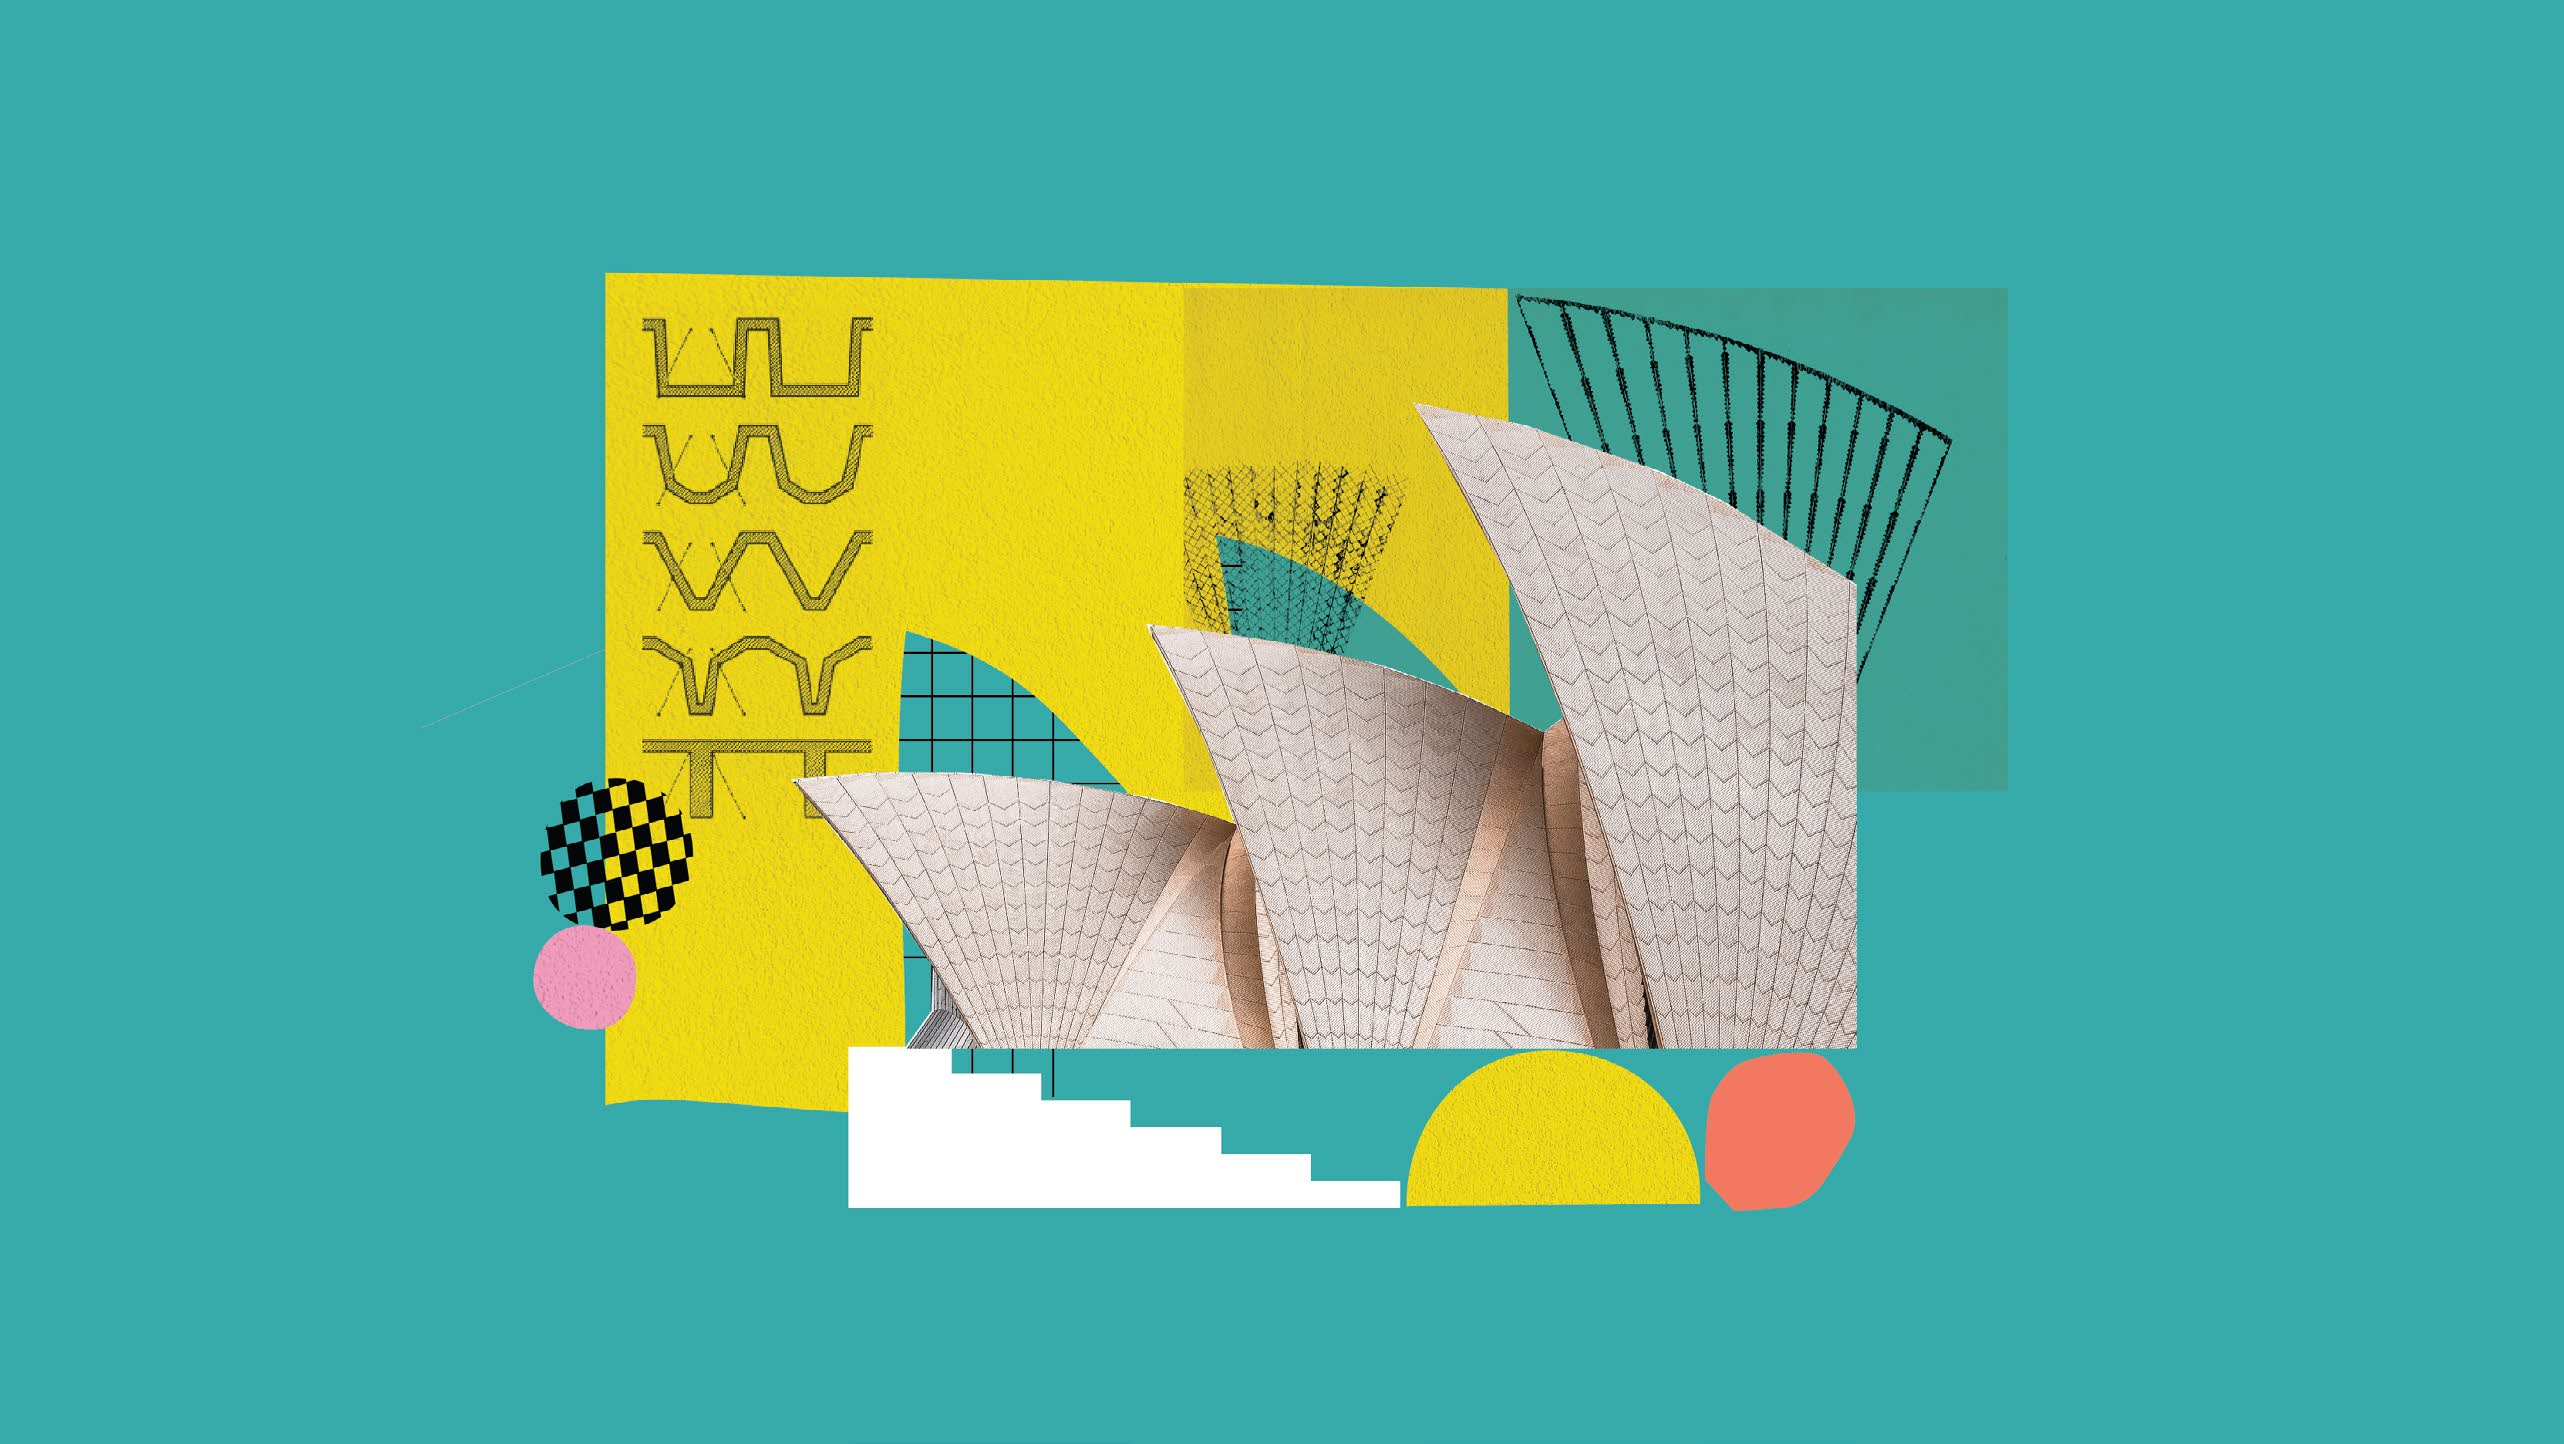 teal background with abstract representation of the Sydney Opera House sails in white in front of a yellow square